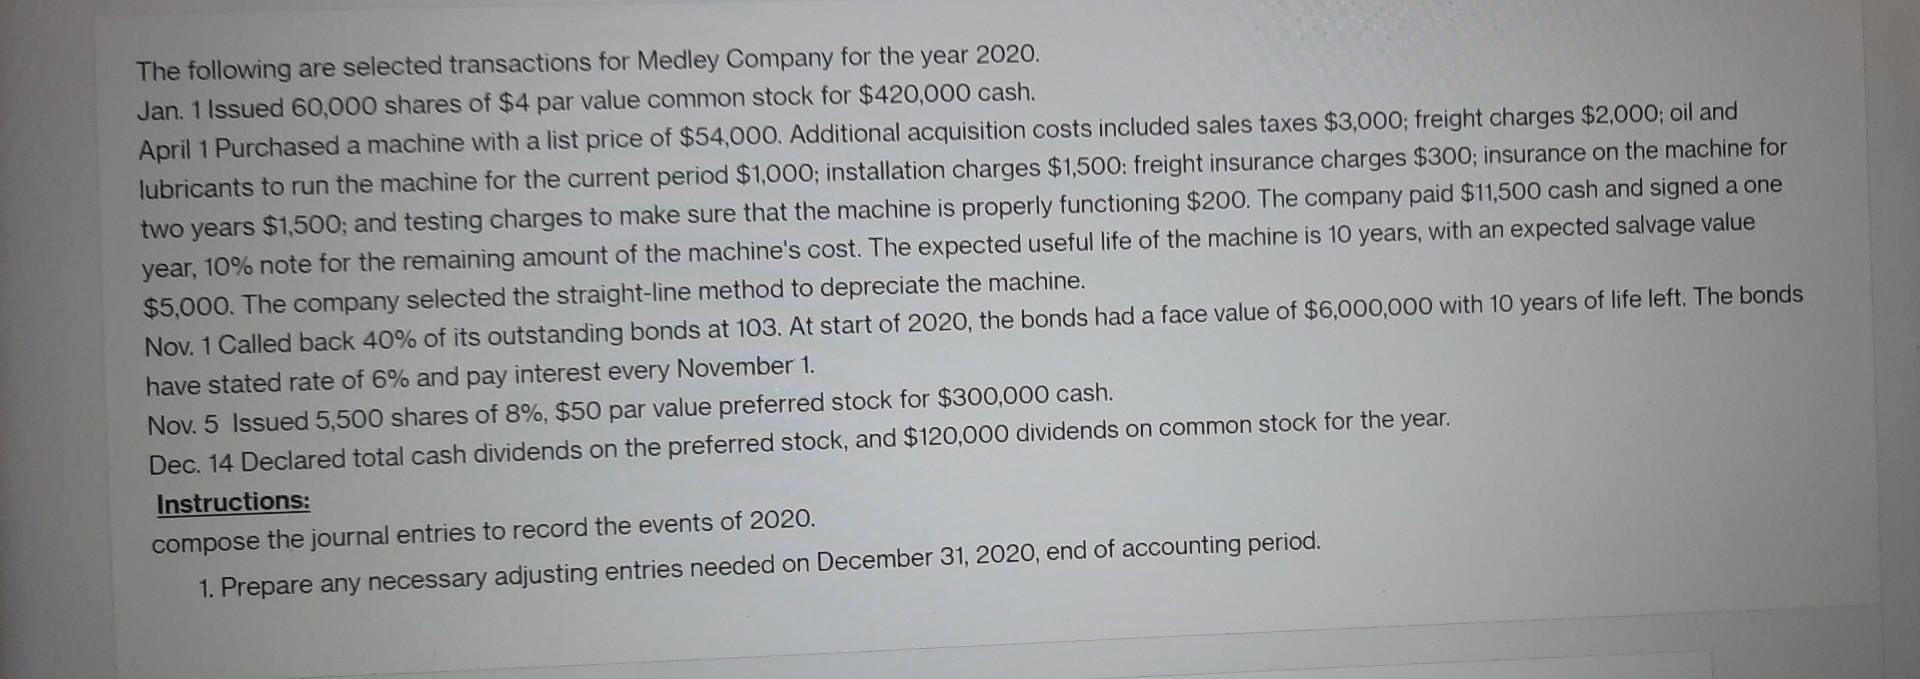 The following are selected transactions for Medley Company for the year \( 2020 . \) Jan. 1 Issued 60,000 shares of \( \$ 4 \